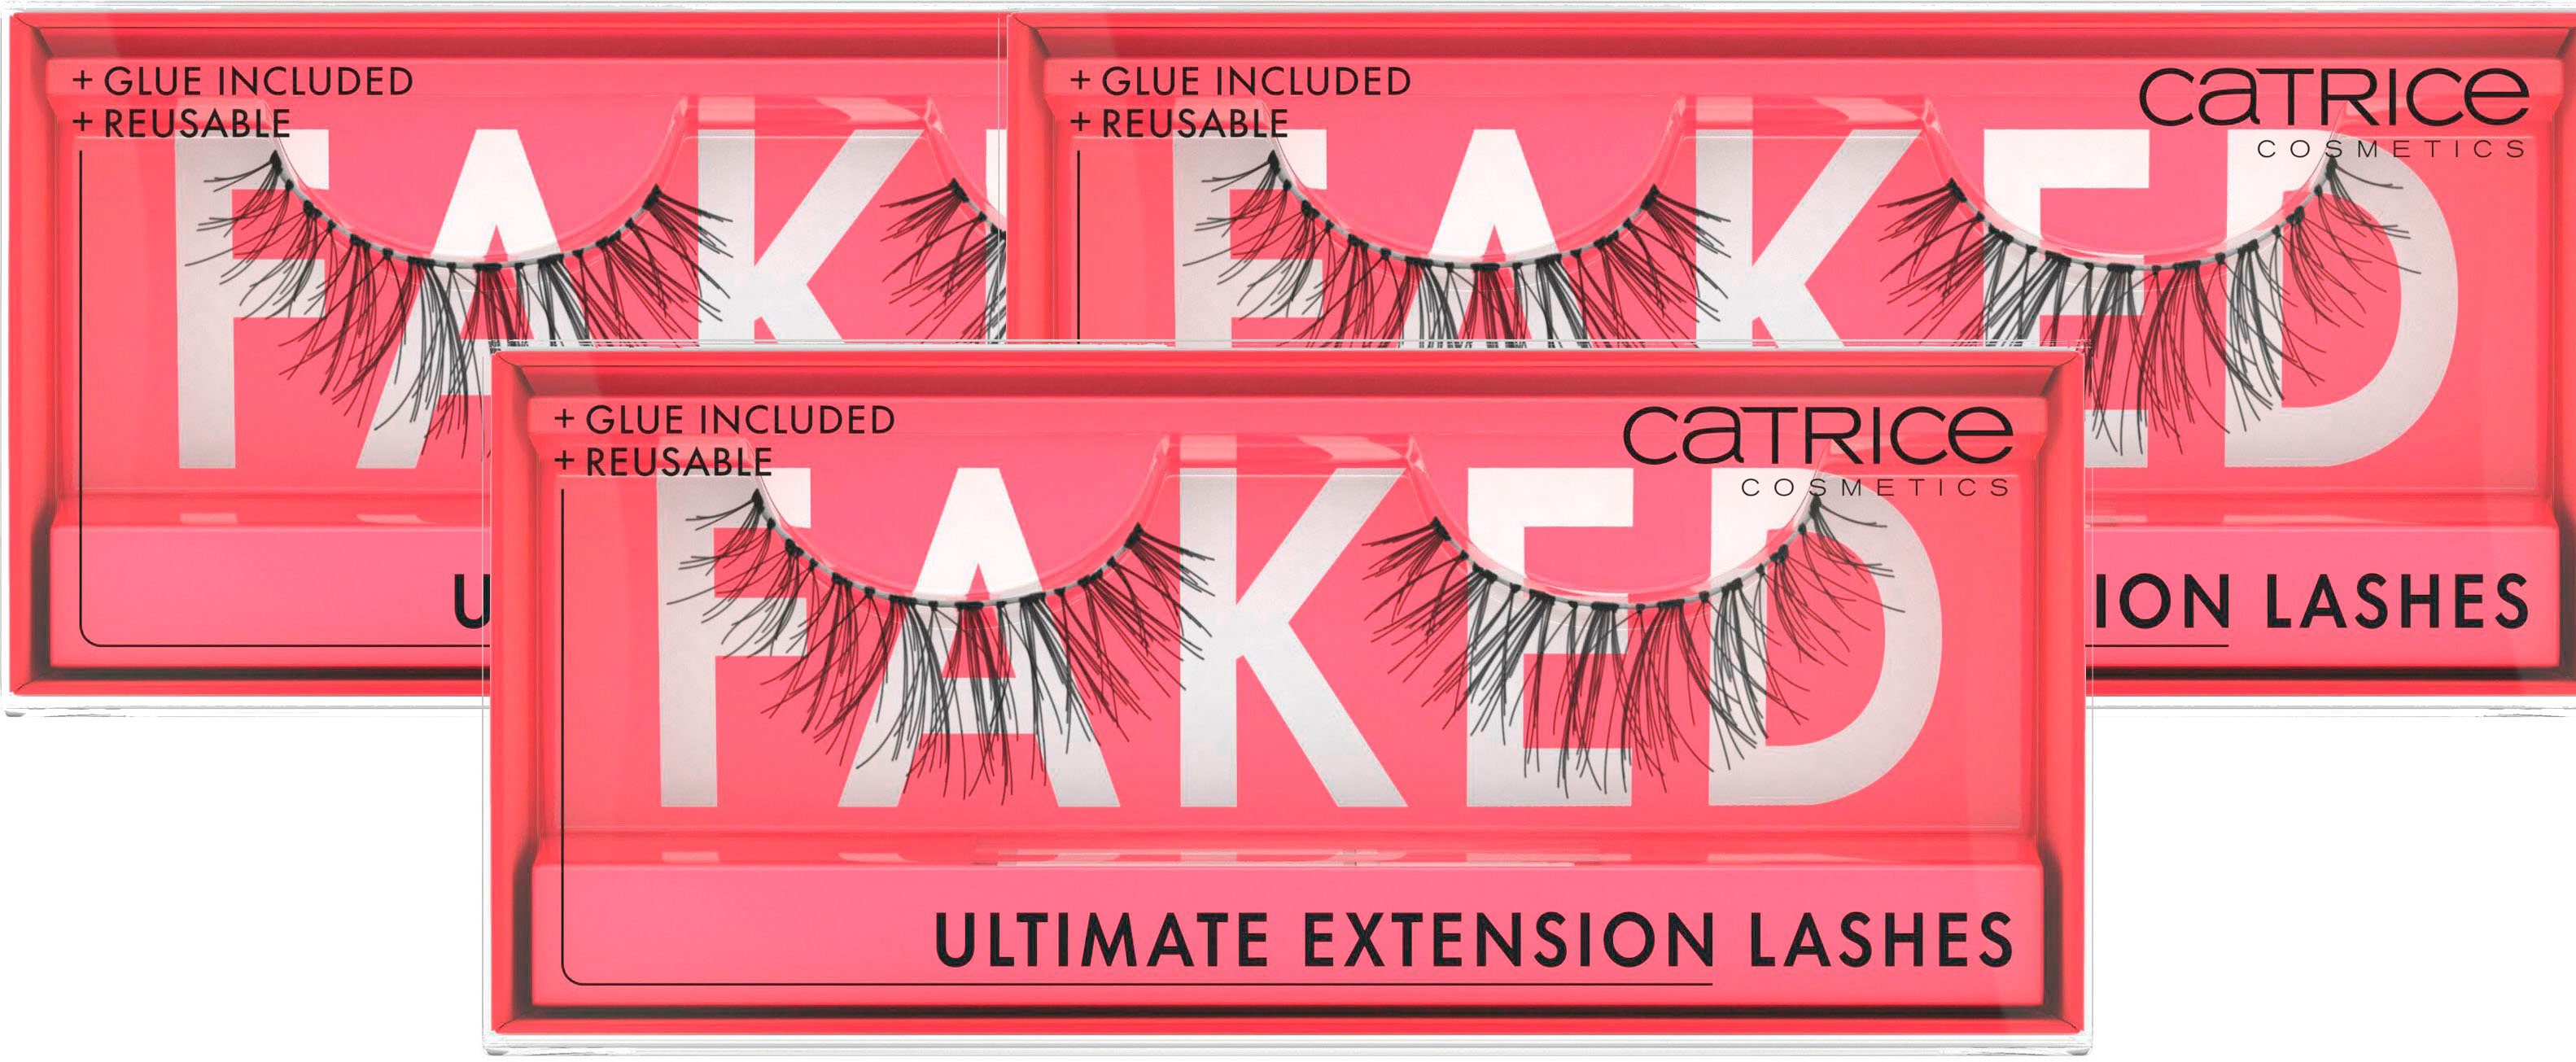 Catrice Bandwimpern Faked Set, Ultimate tlg. Lashes, Extension 3